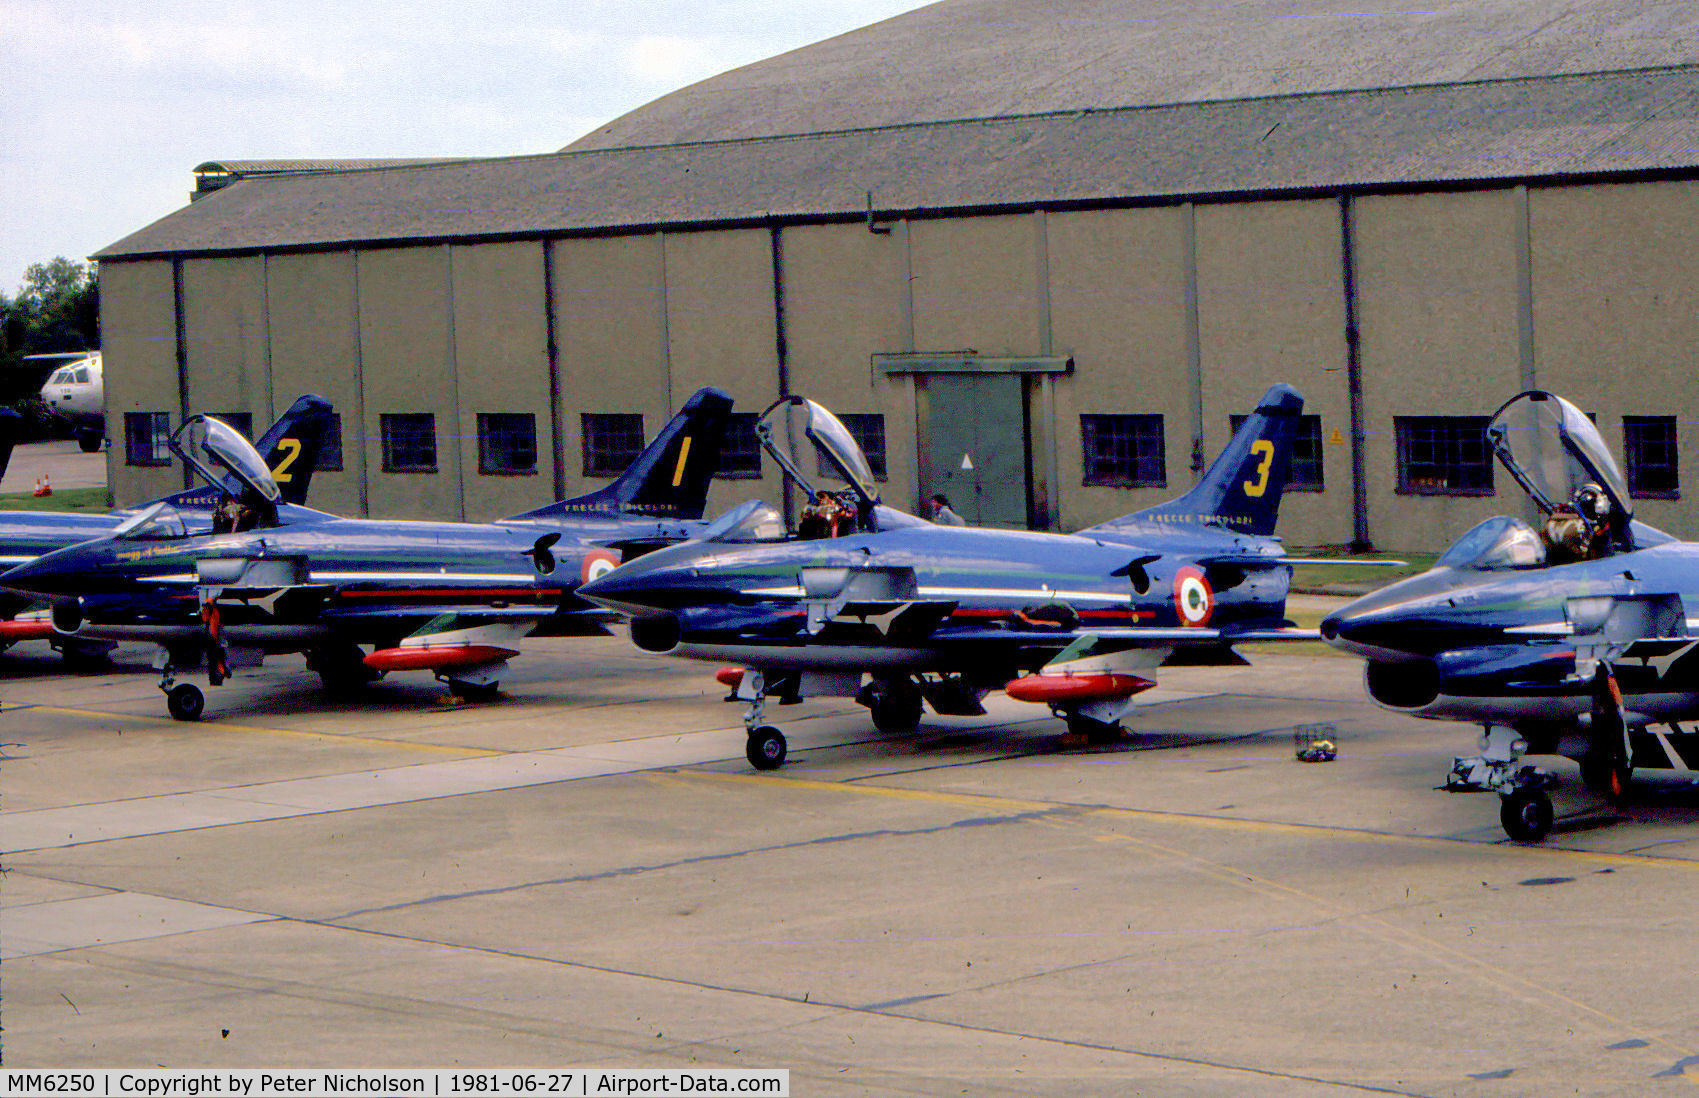 MM6250, Fiat G-91PAN C/N 16, Fiat G-91PAN number 3 of the Italian Air Force's demonstration team Frecce Tricolori at the 1981 Intn'l Air Tattoo at RAF Greenham Common.